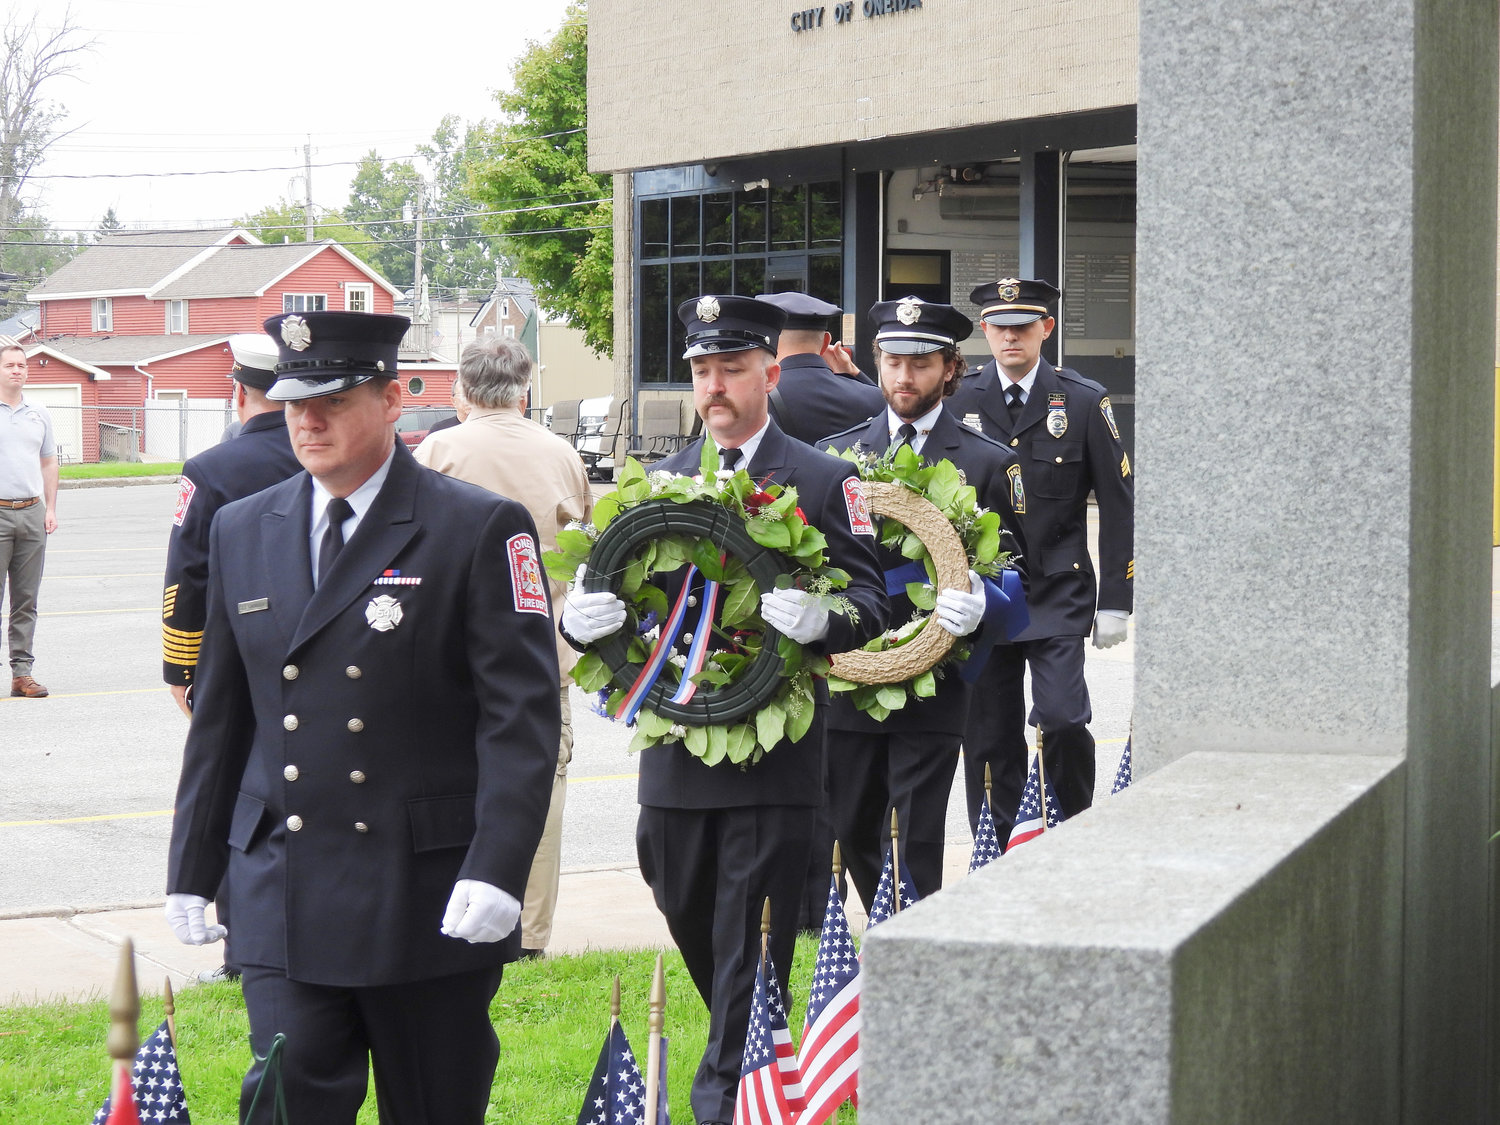 The Oneida Fire Department and Oneida Police Department carry the wreaths for the city's 9/11 Remembrance Ceremony on Sunday.